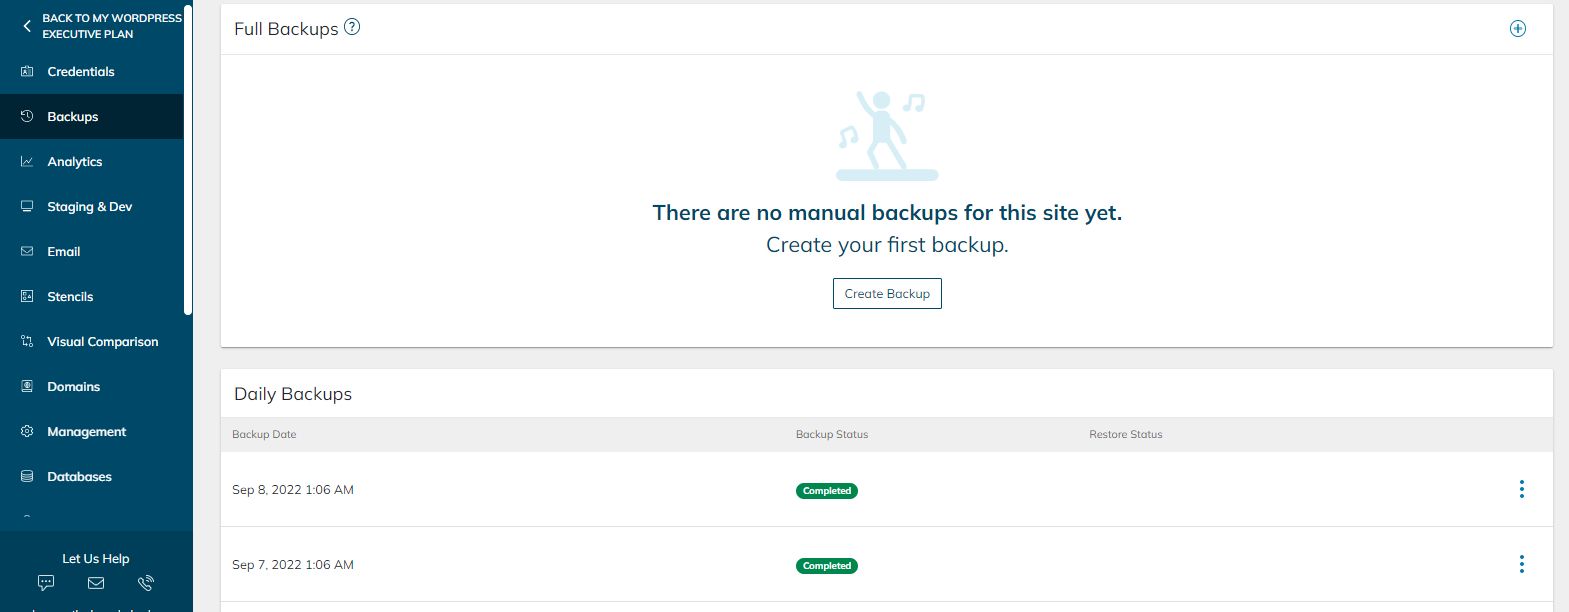 Should you need to restore your website from a daily backup for any reason, you can do so within the Nexcess portal.